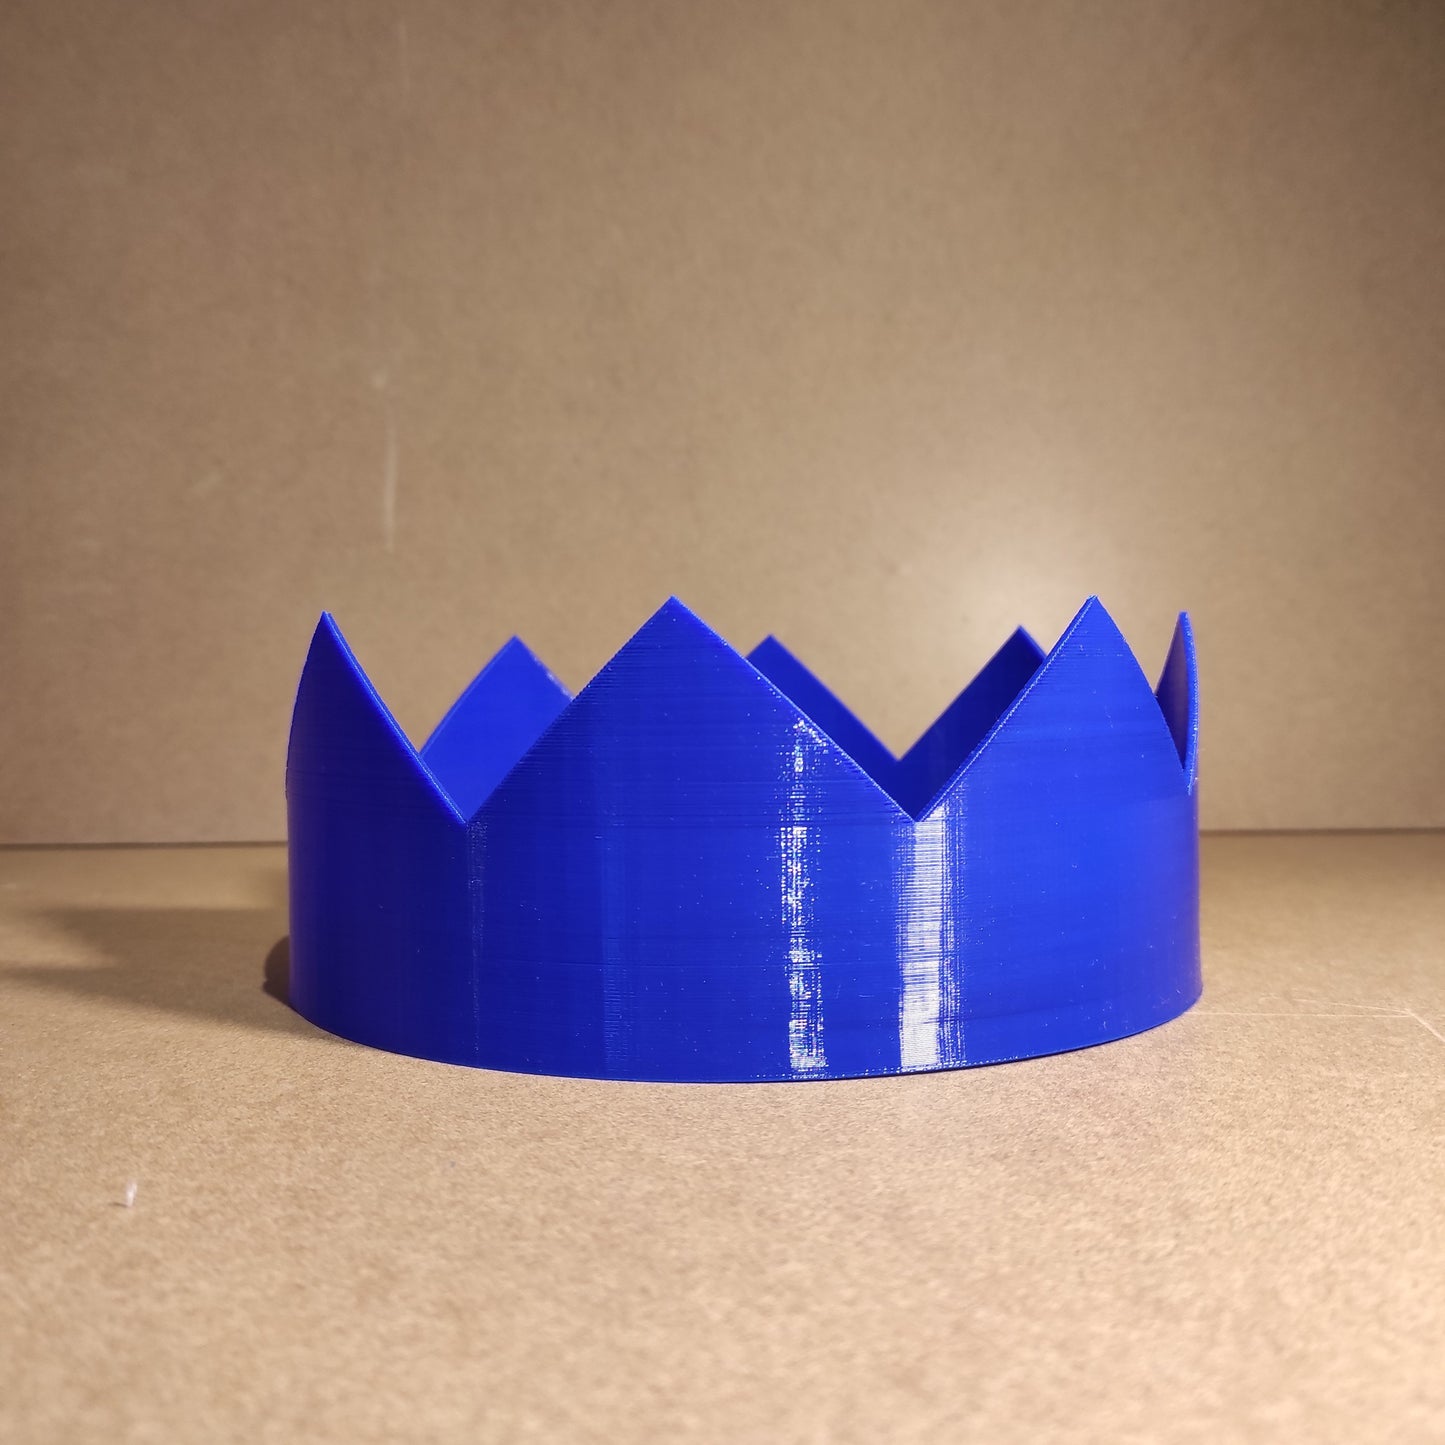 OSRS Party Hat Runescape - Cosplay Prop - Life Size - Inspired by the game! RS Partyhat